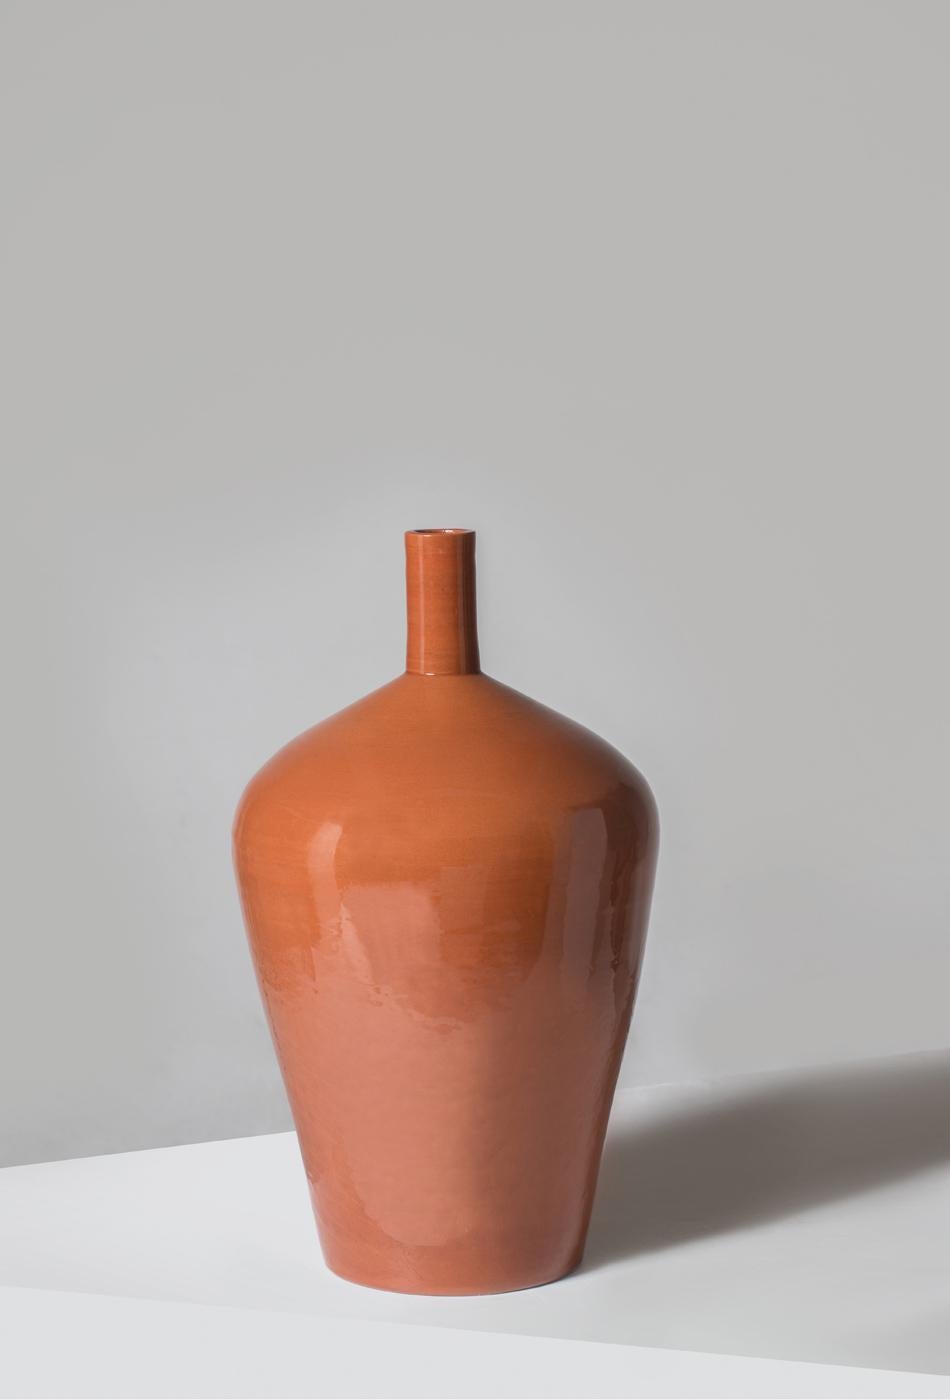 Italian Earth-Toned Abba Collection of Ceramic Vases Celebrates Ancient Water Urns For Sale